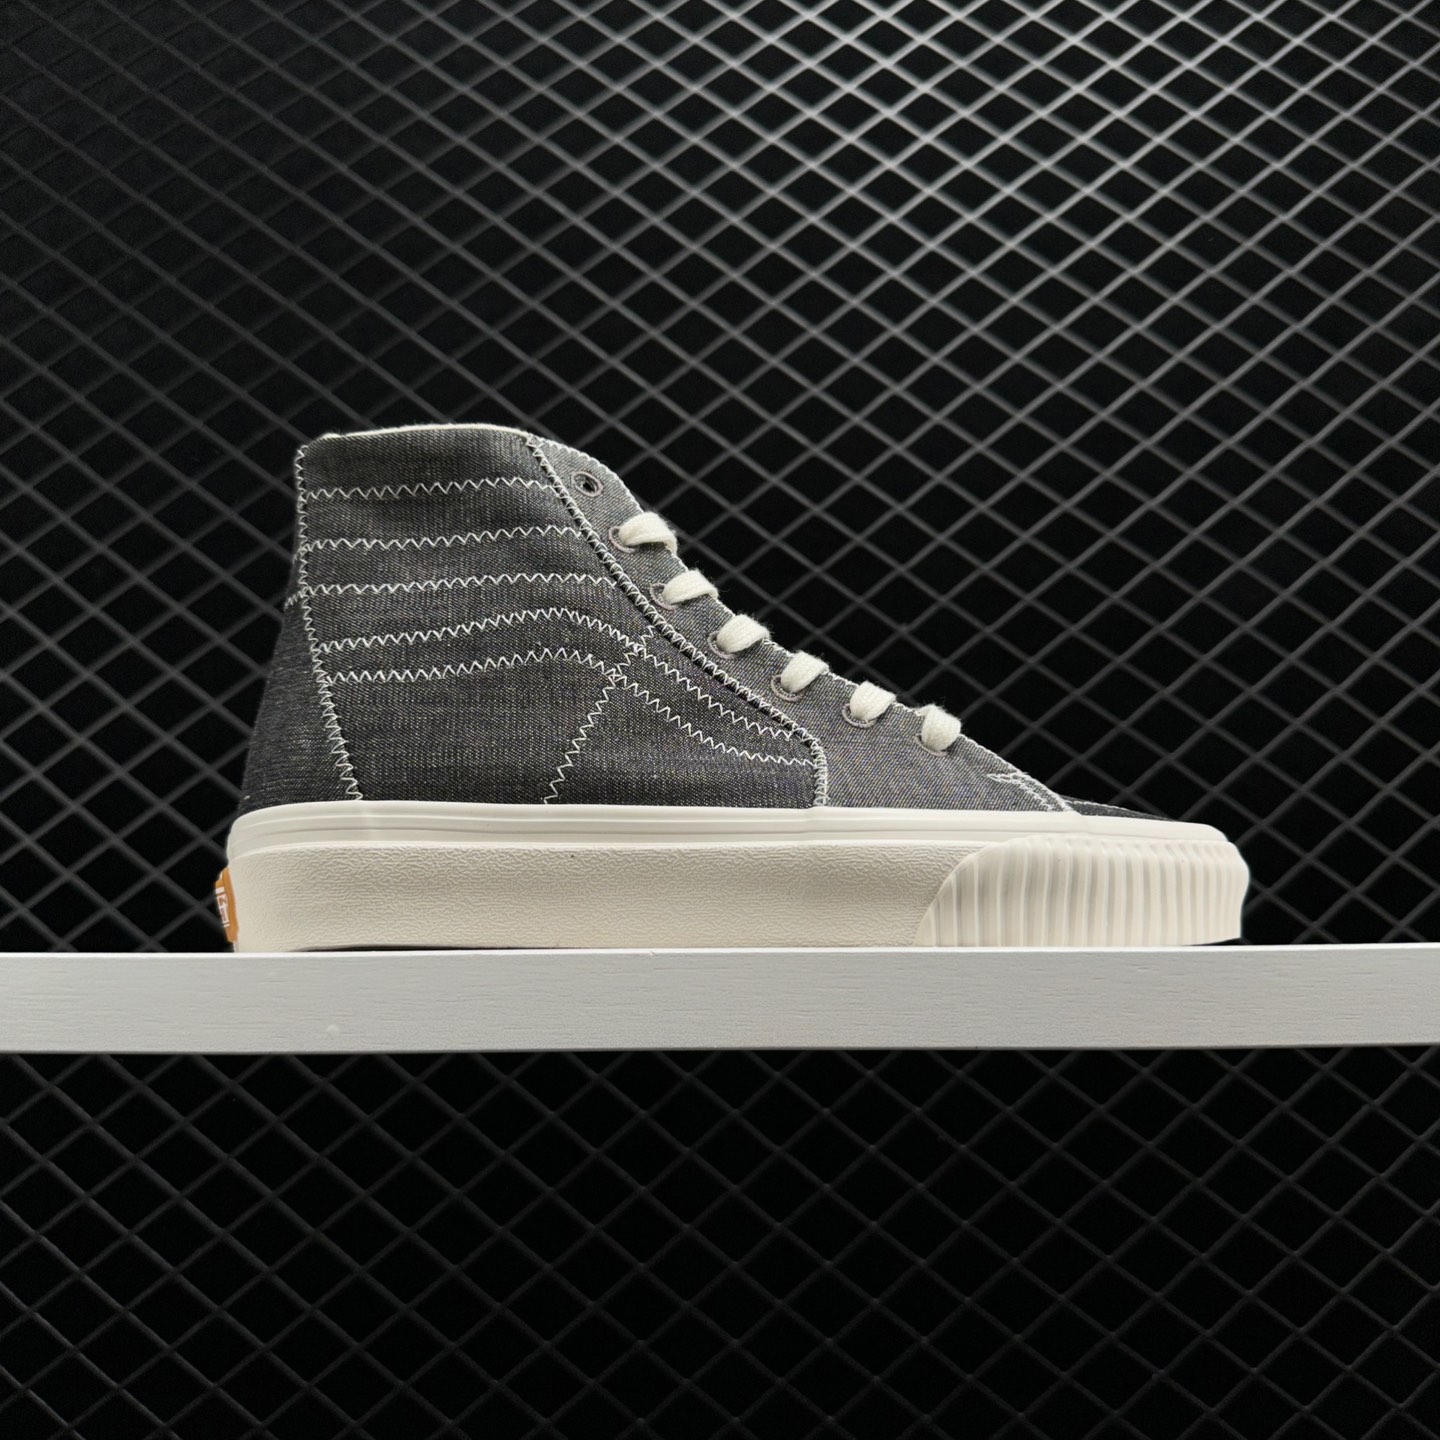 Vans SK8-HI Eco Theory 'Gray White' VN0A7Q62BKP - Trendy and Sustainable High-Top Sneakers